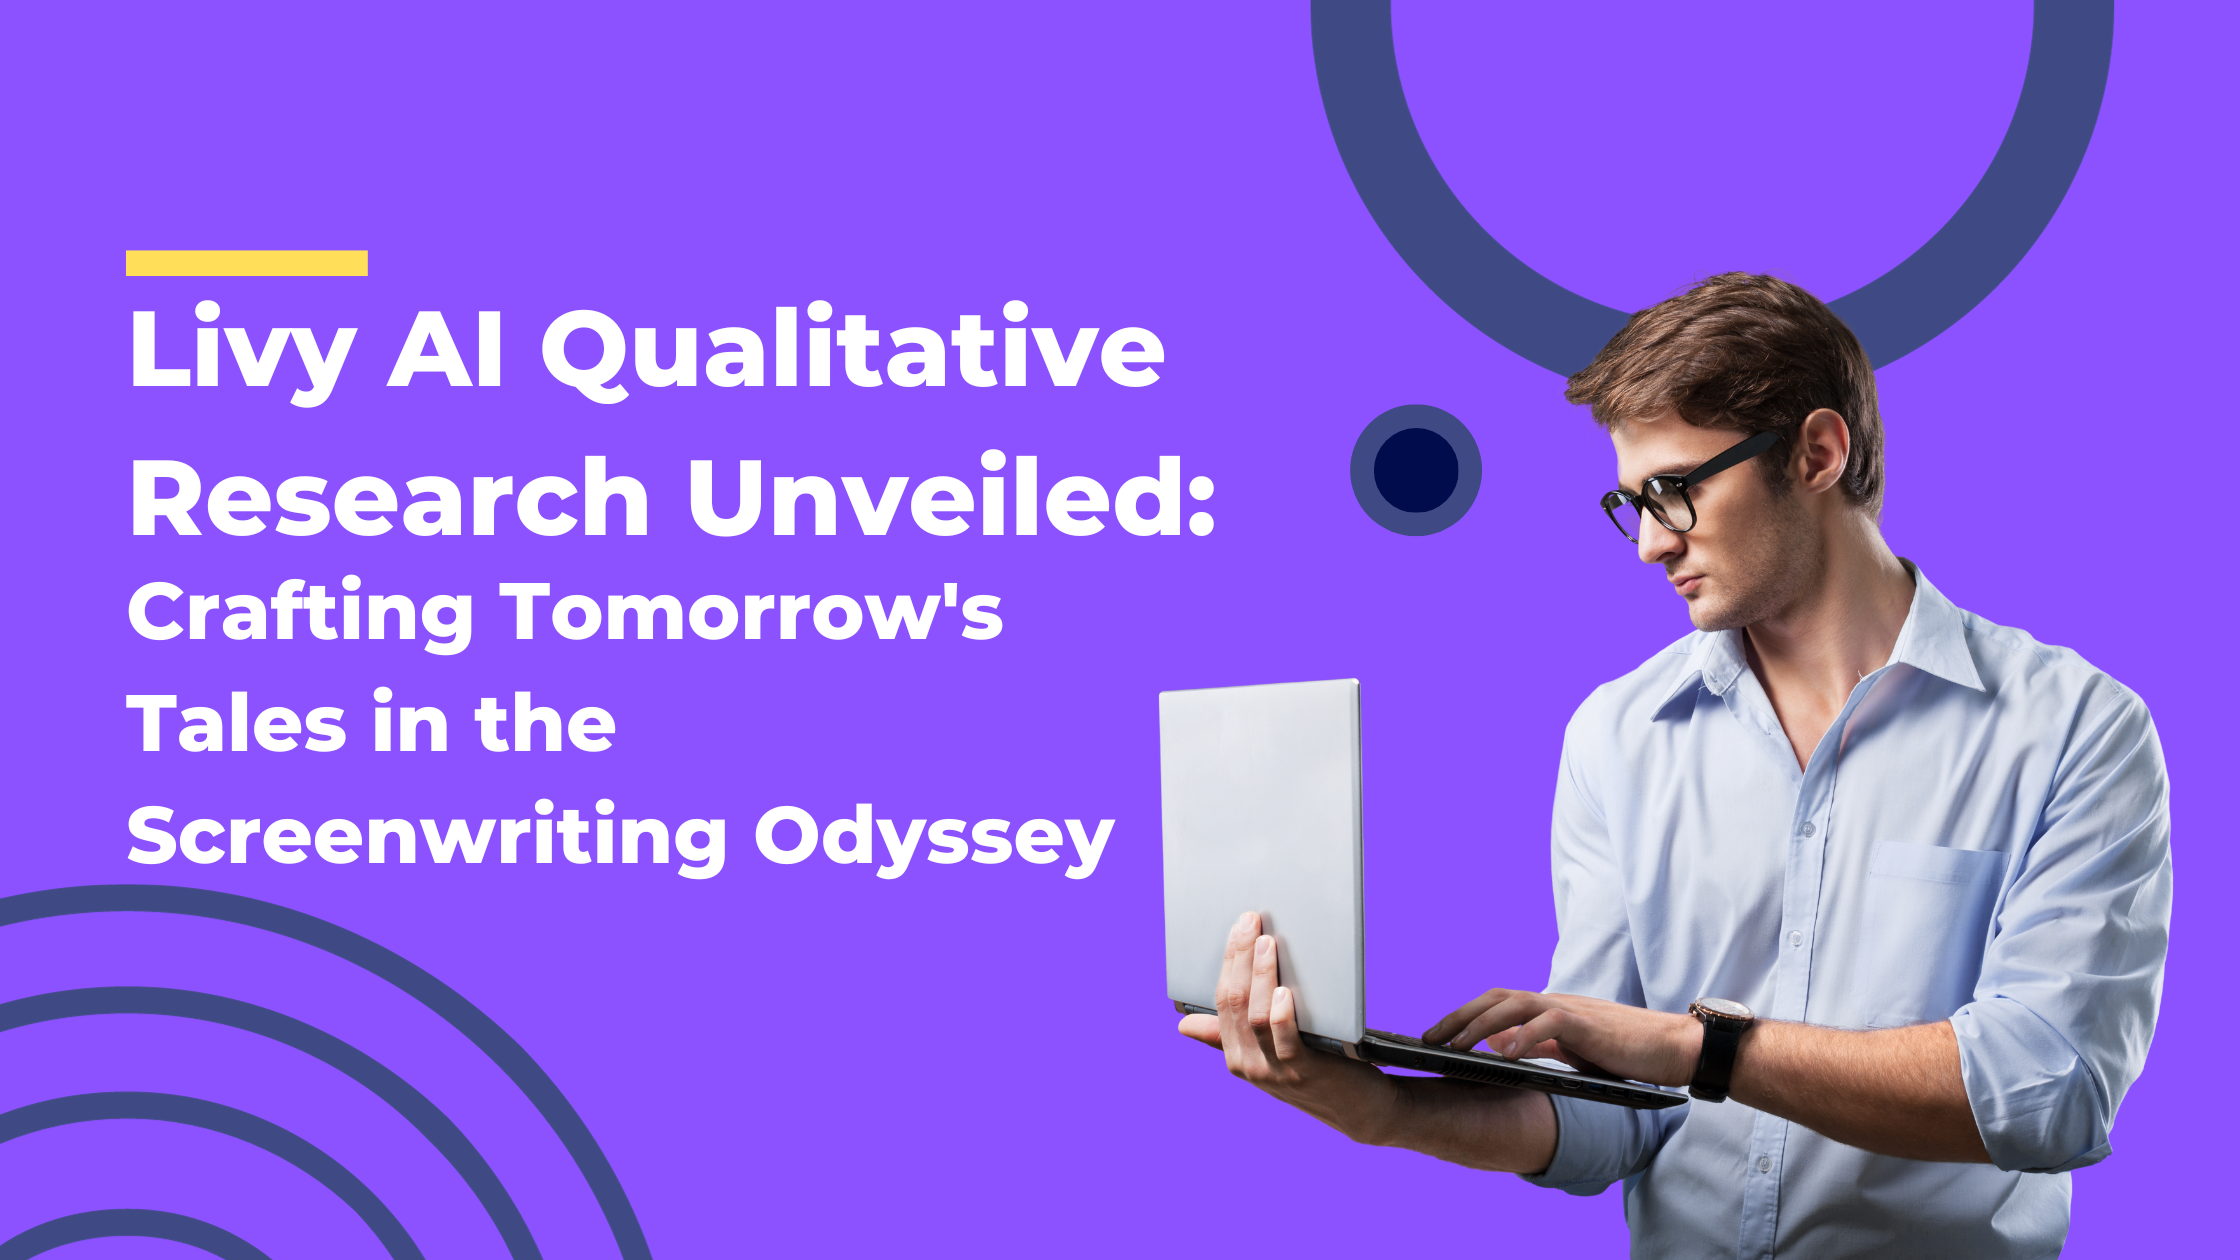 Livy AI Qualitative Research Unveiled : Crafting Tomorrow's Tales in the Screenwriting Odyssey